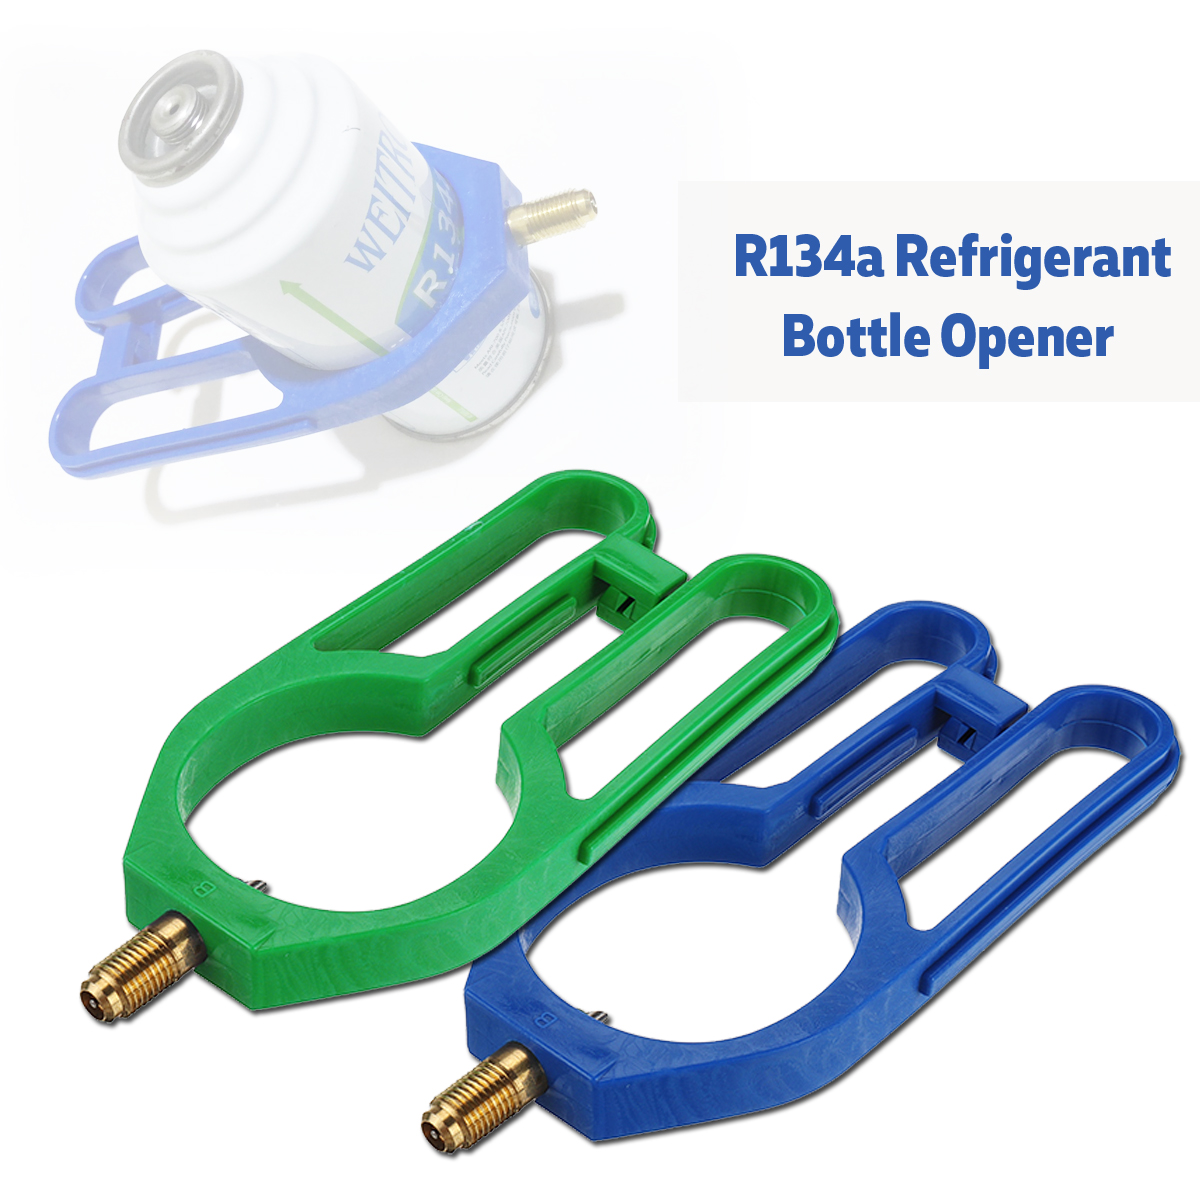 Universal-Car-Can-Air-Conditioning-Refrigerant-Bottle-Opener-Refrigeration-Open-Valve-for-R134A-1360405-1